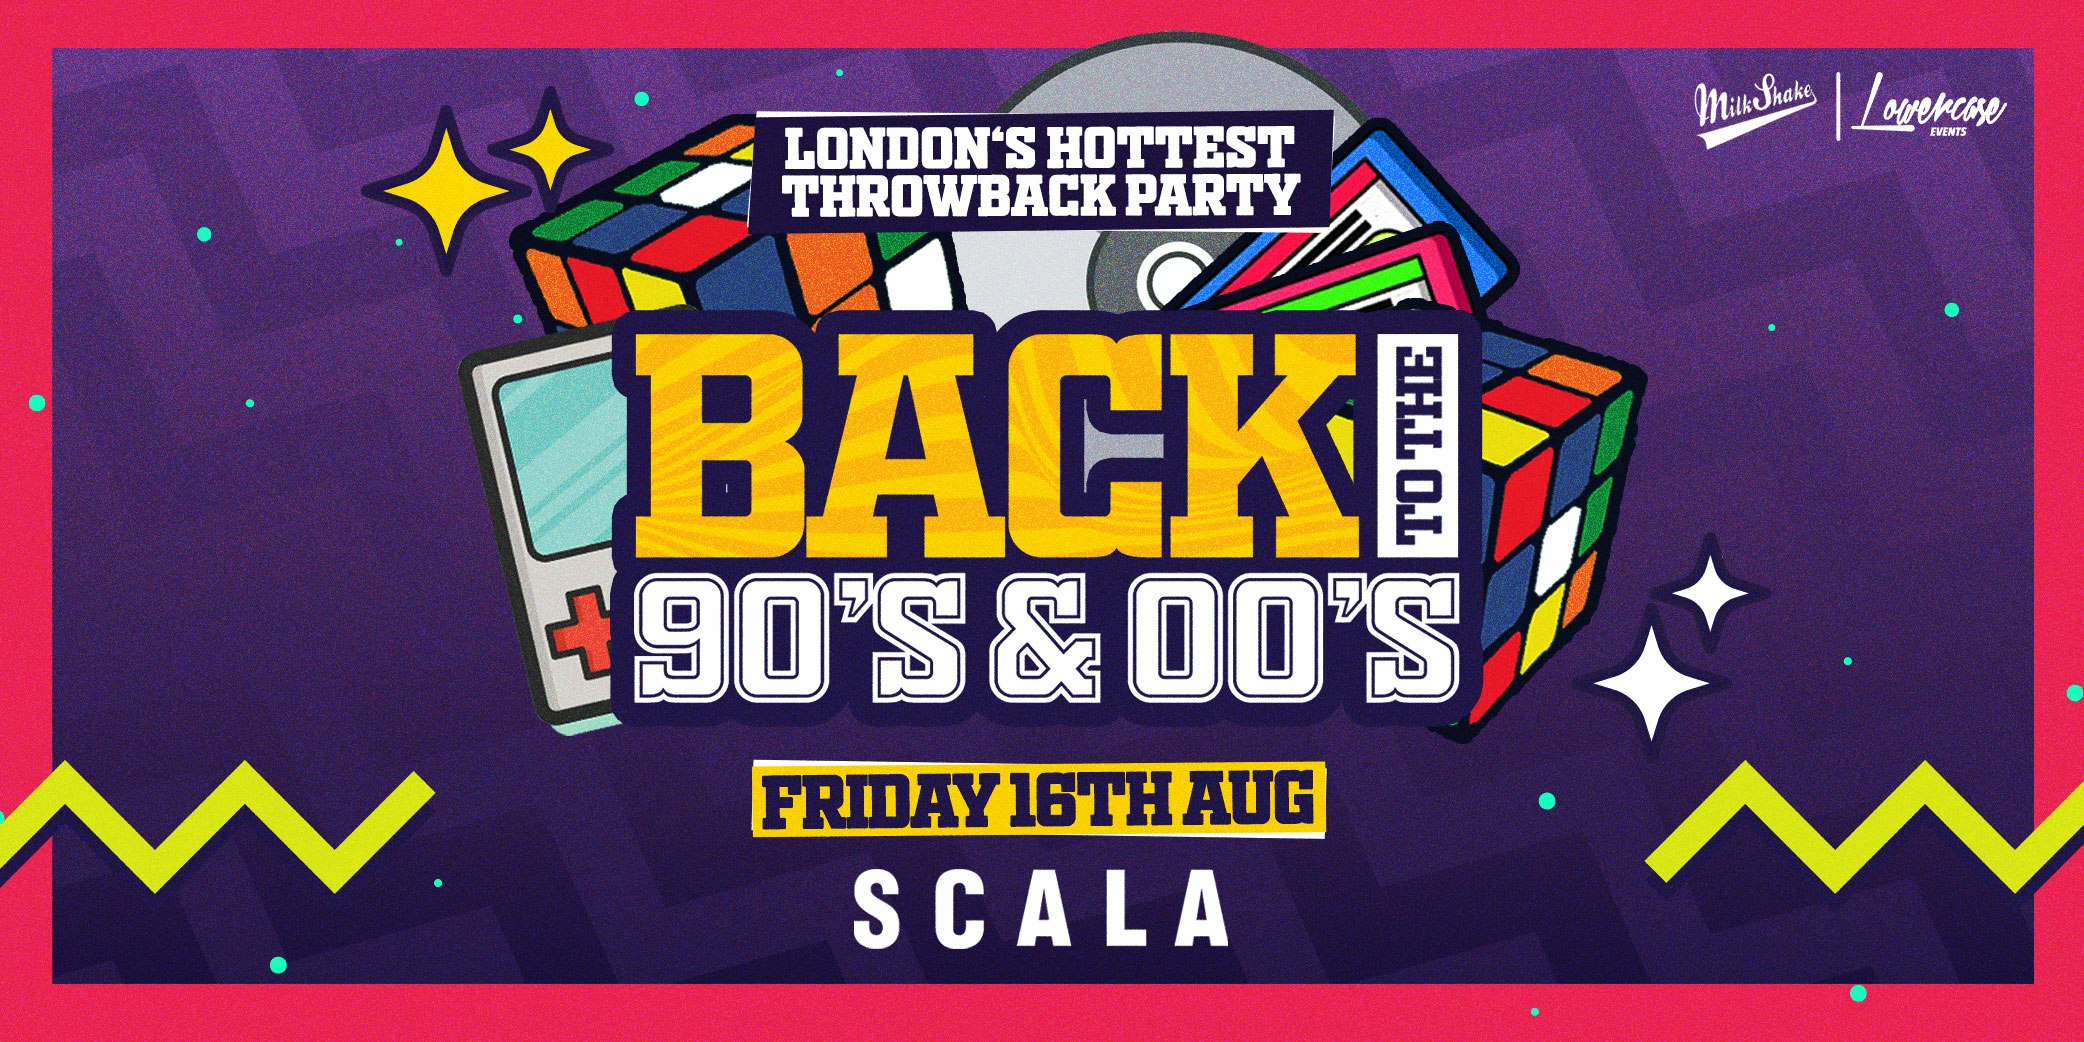 Back To The 90’s & 00’s Summer Closing – London’s ORIGINAL Throwback Session at Scala